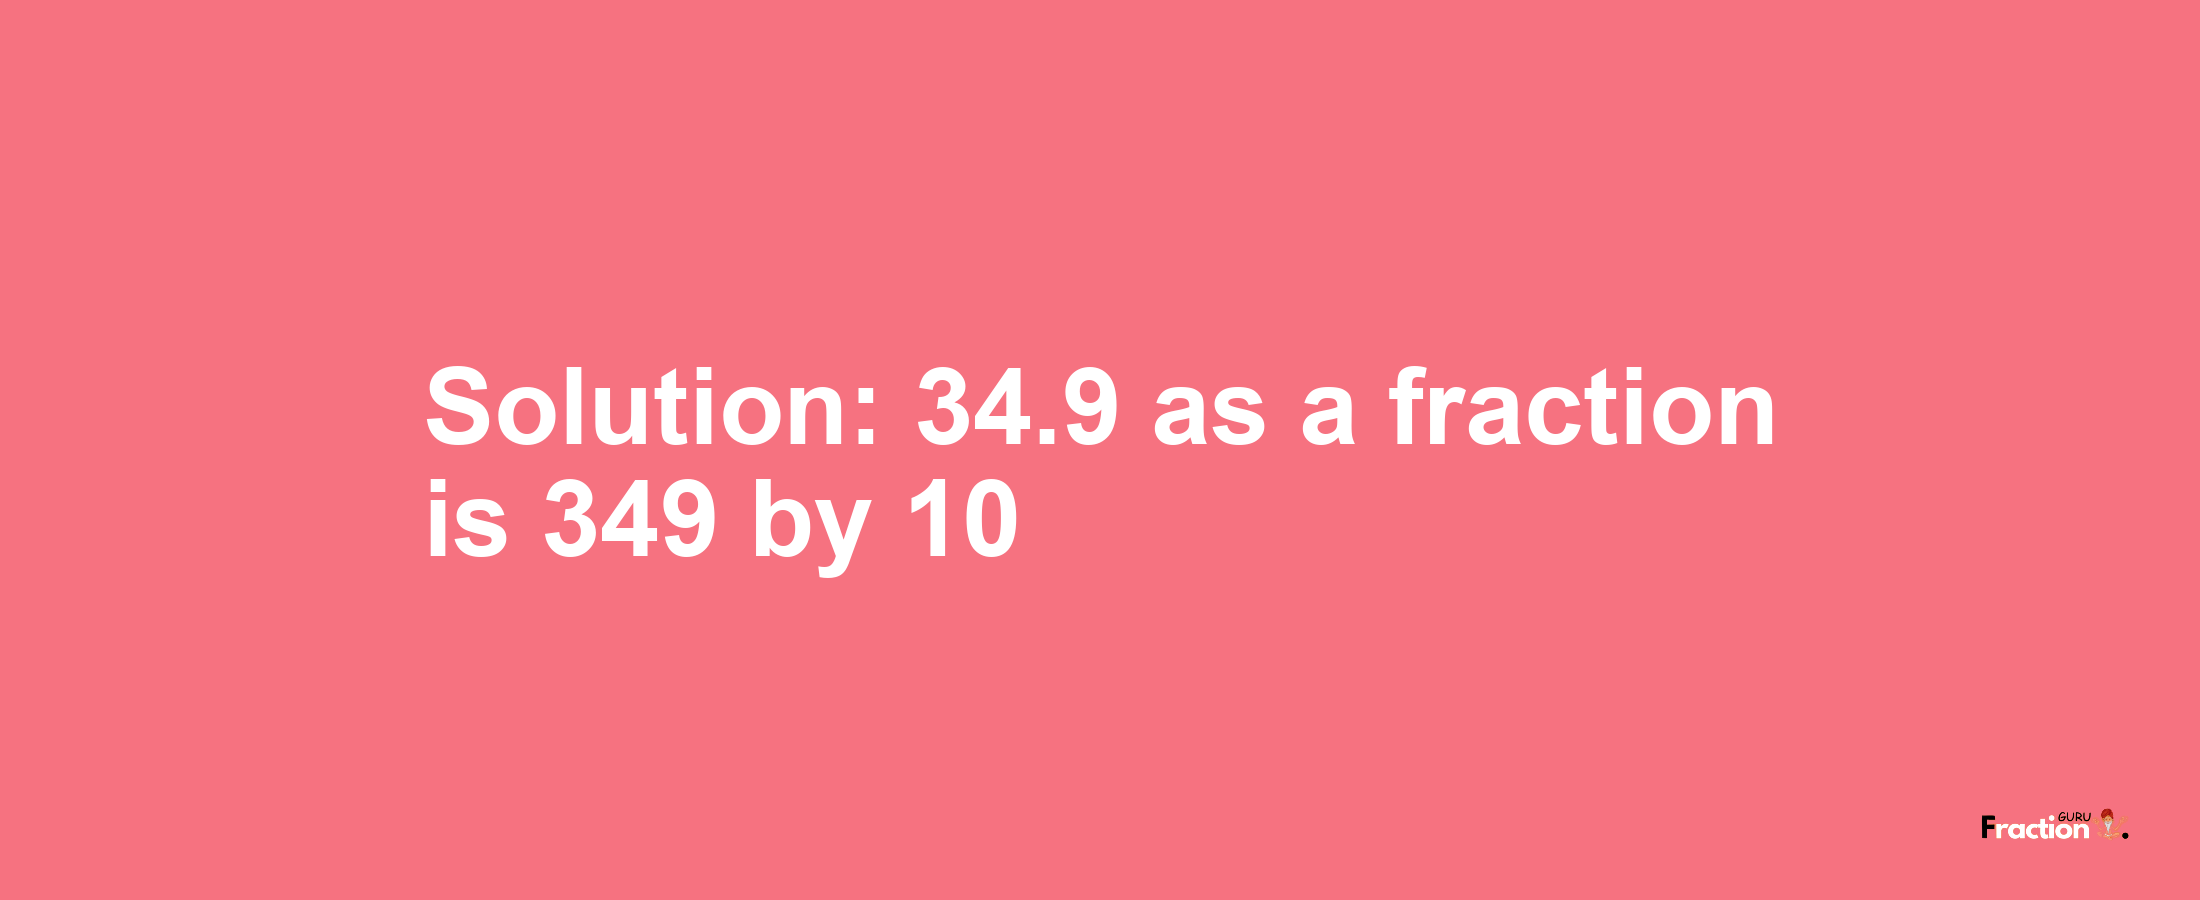 Solution:34.9 as a fraction is 349/10